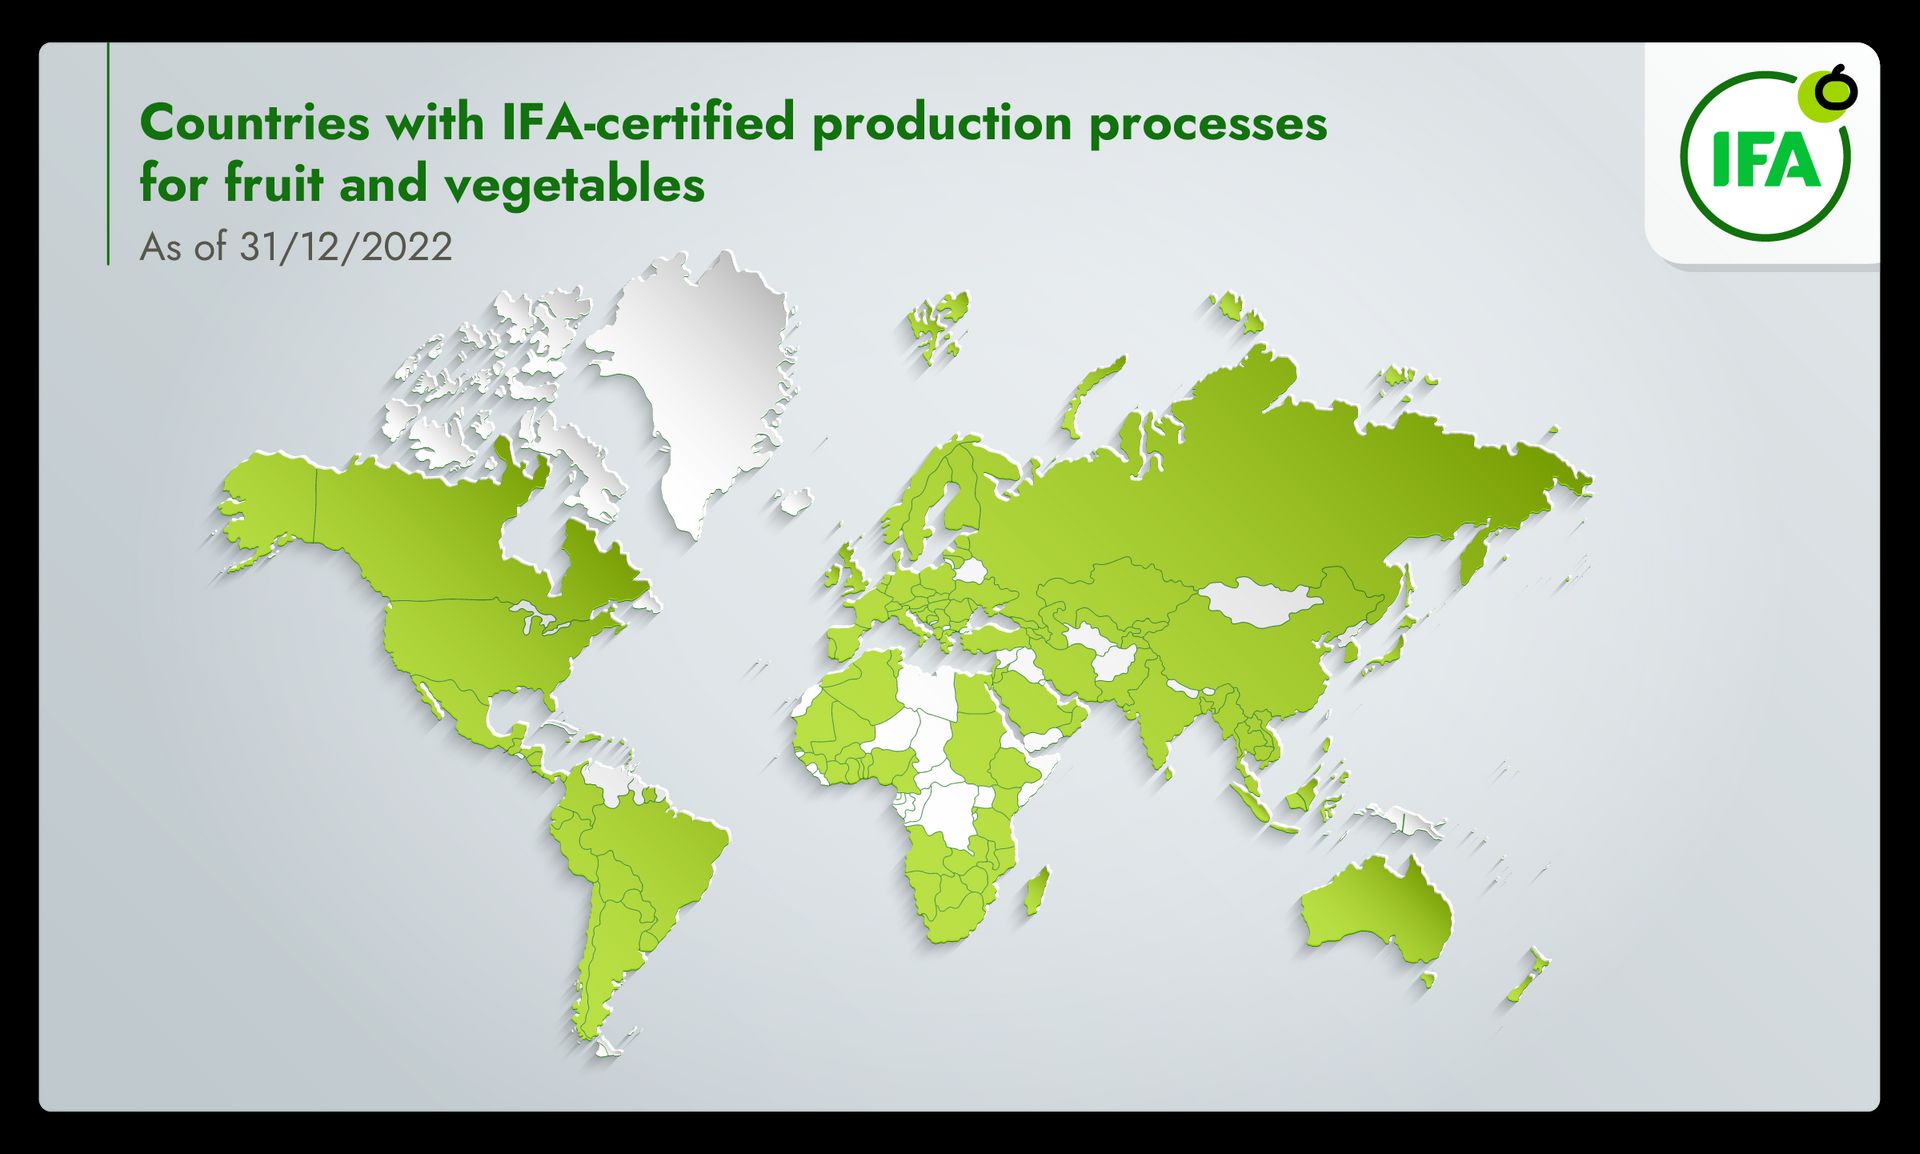 Infographic of a world map identifying countries with Integrated Farm Assurance certified production processes for fruit and vegetables